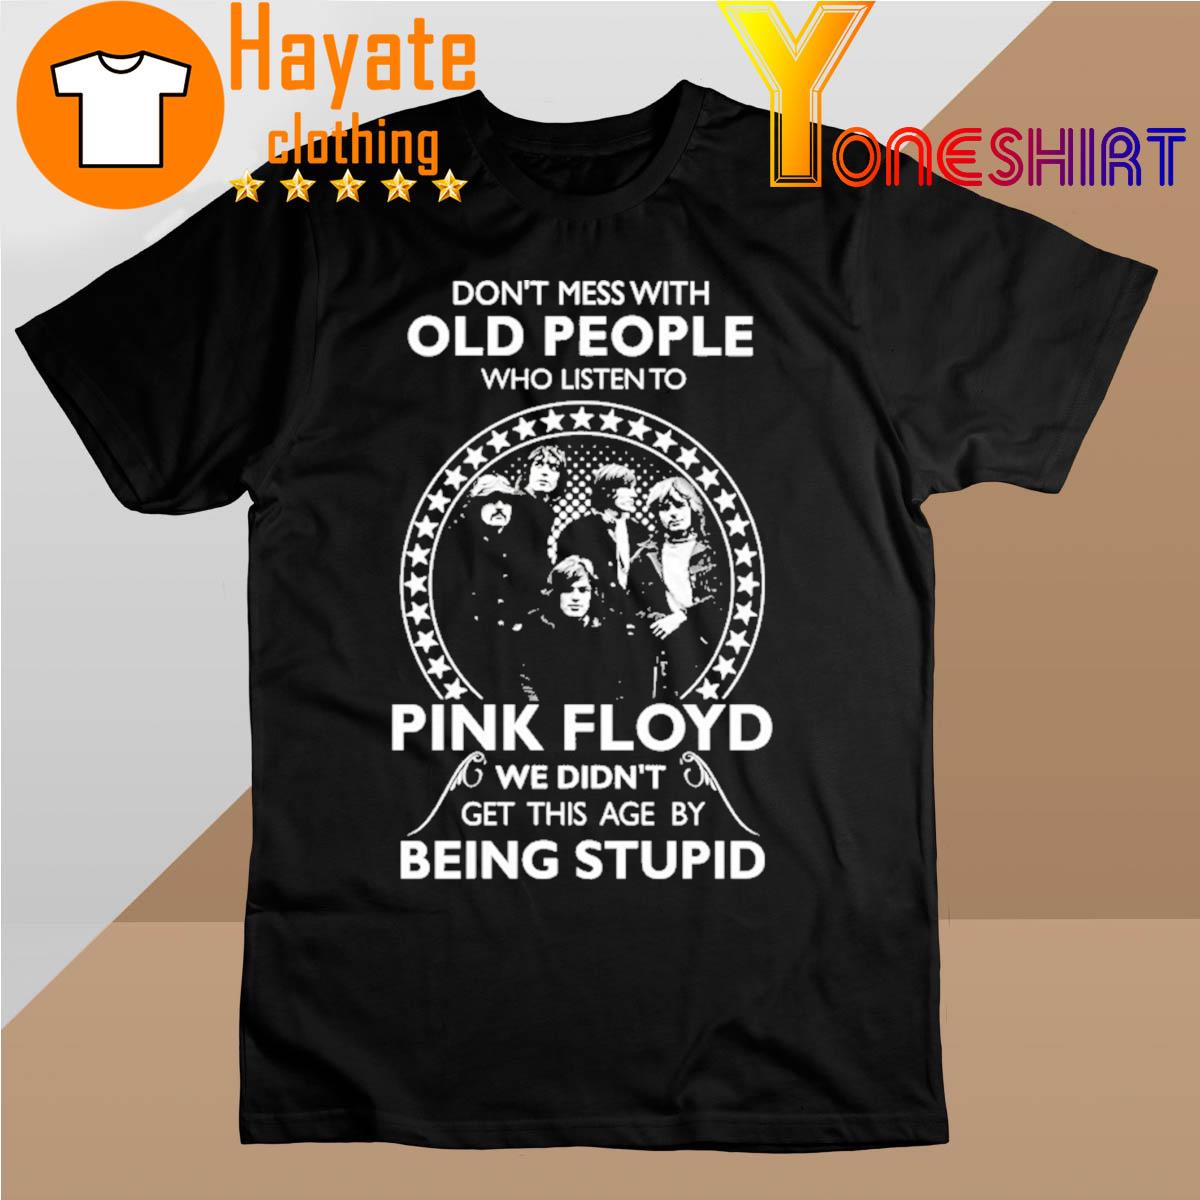 Don't Mess with Old People who listen to Pink Floyd We didn't get this age by Being Stupid shirt